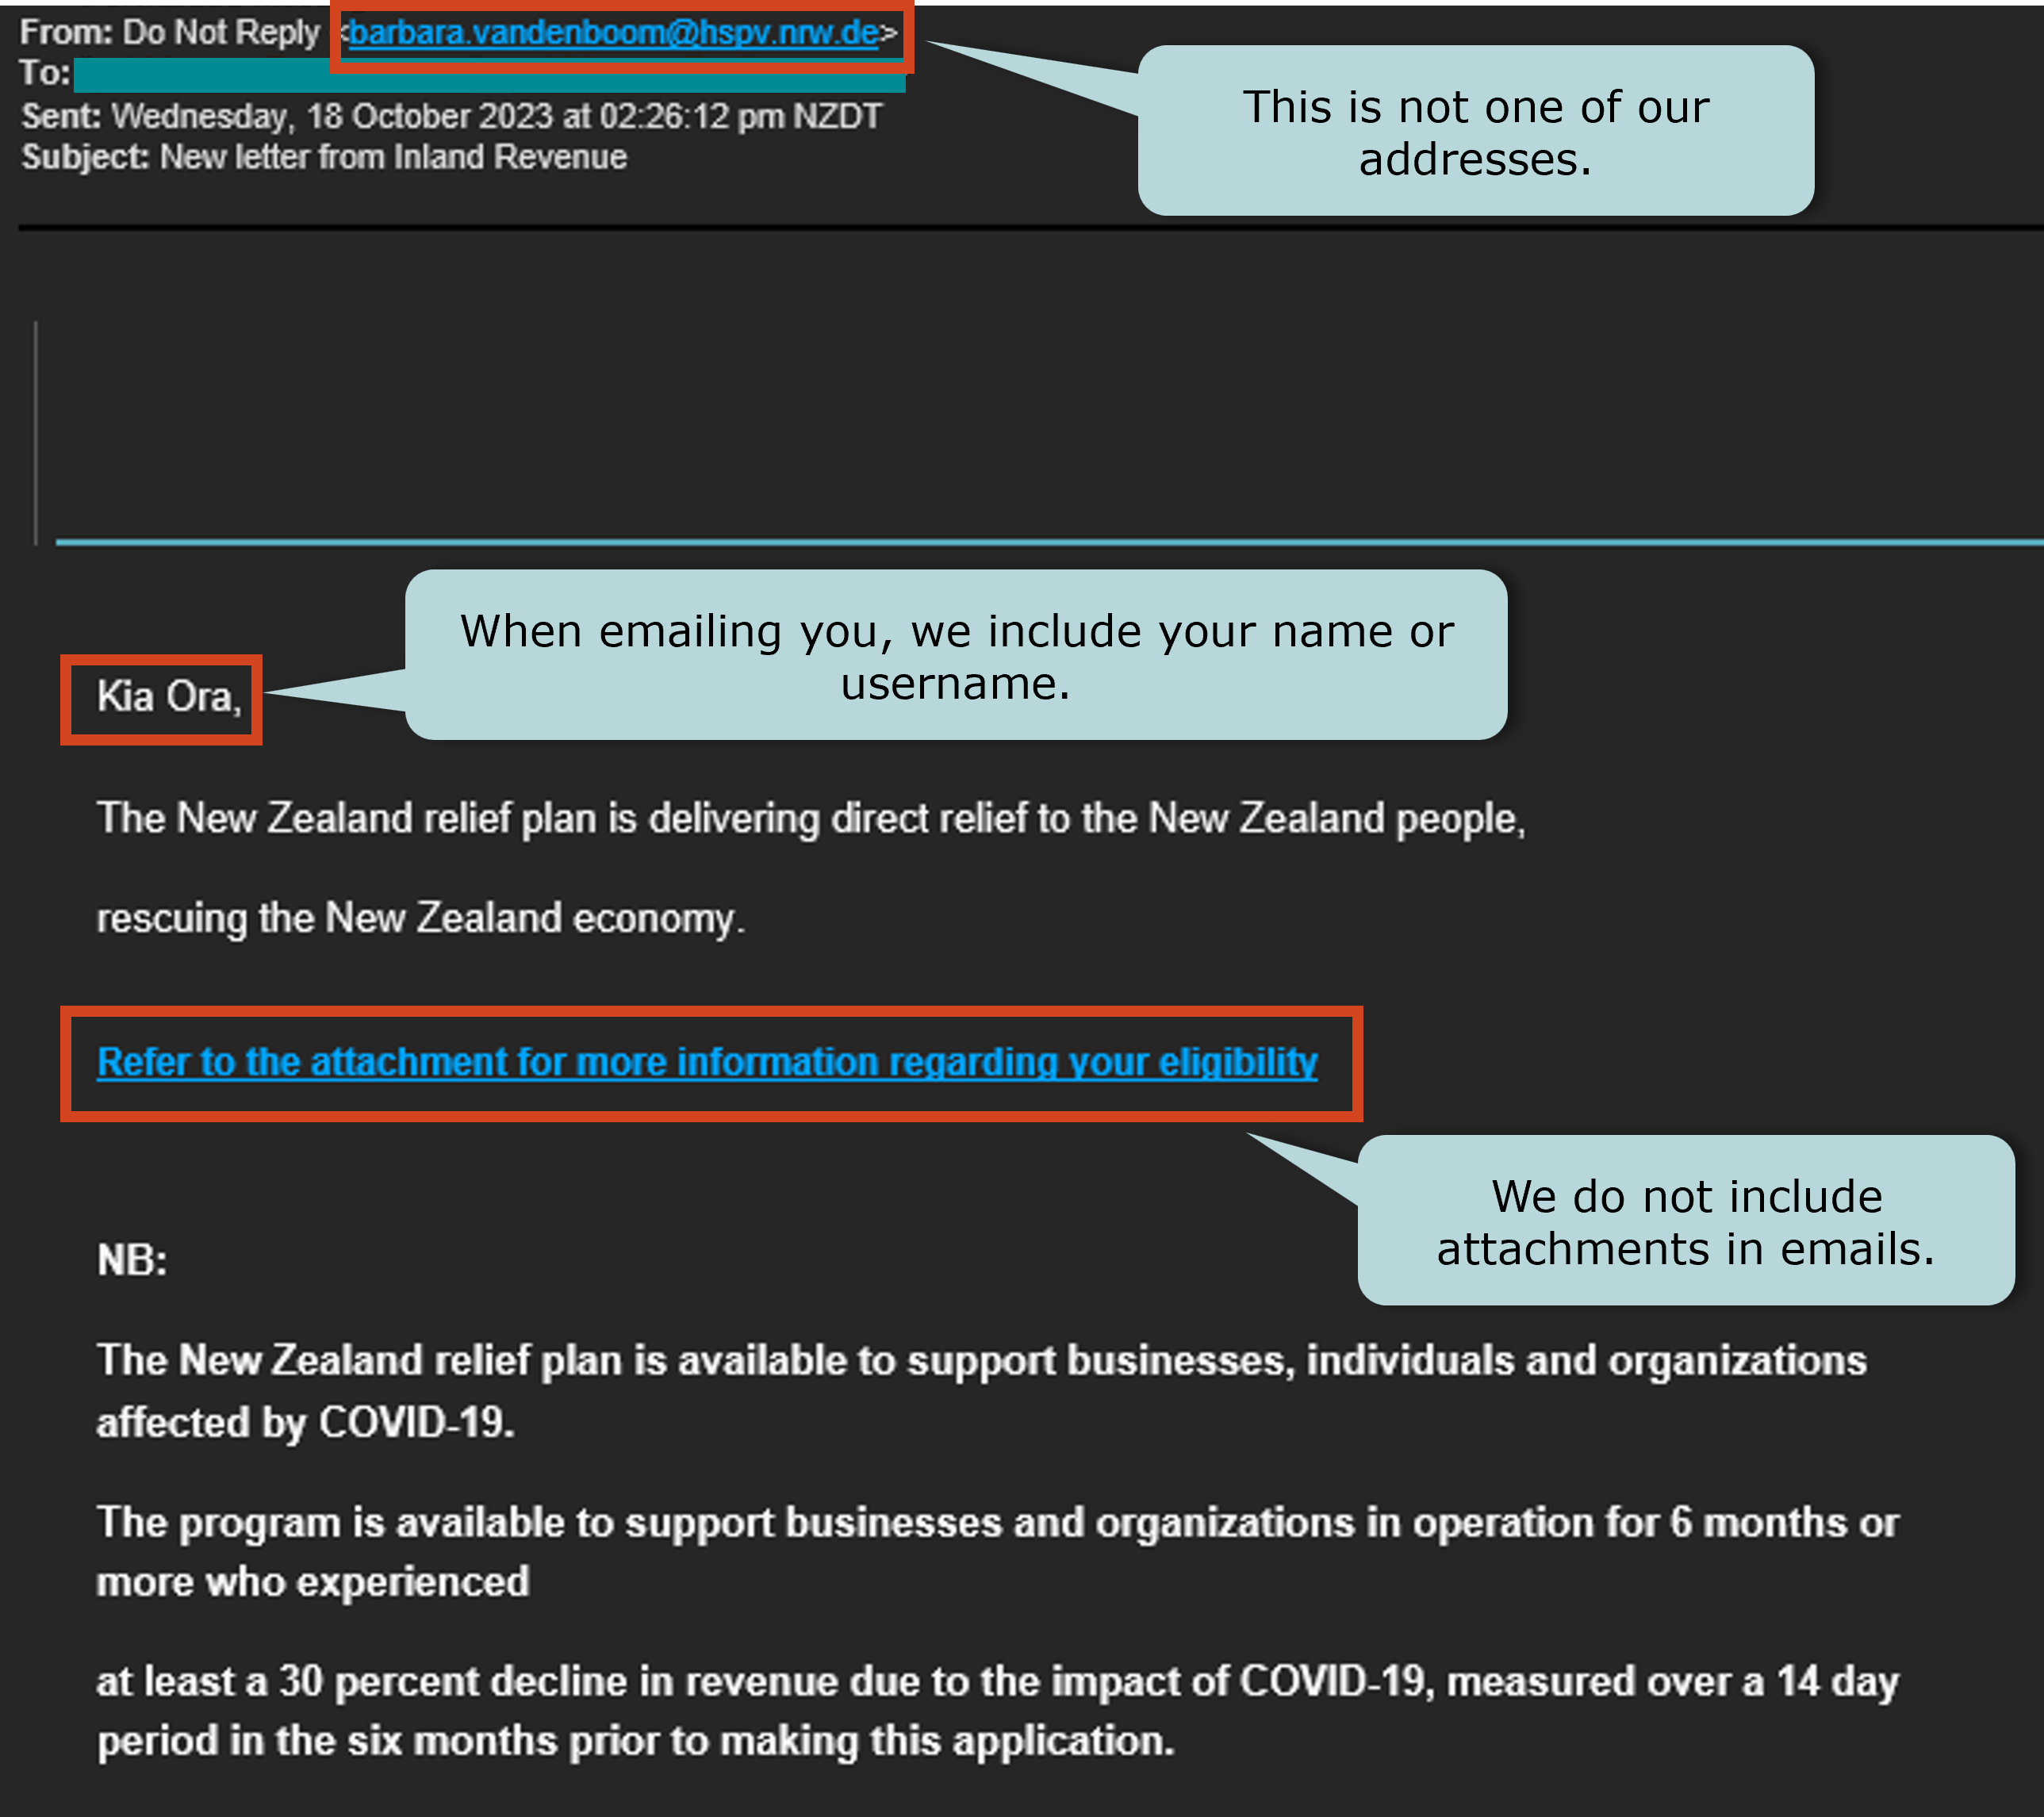 An email scam about COVID-19 that is not from a Te Tari Taake Inland Revenue email.